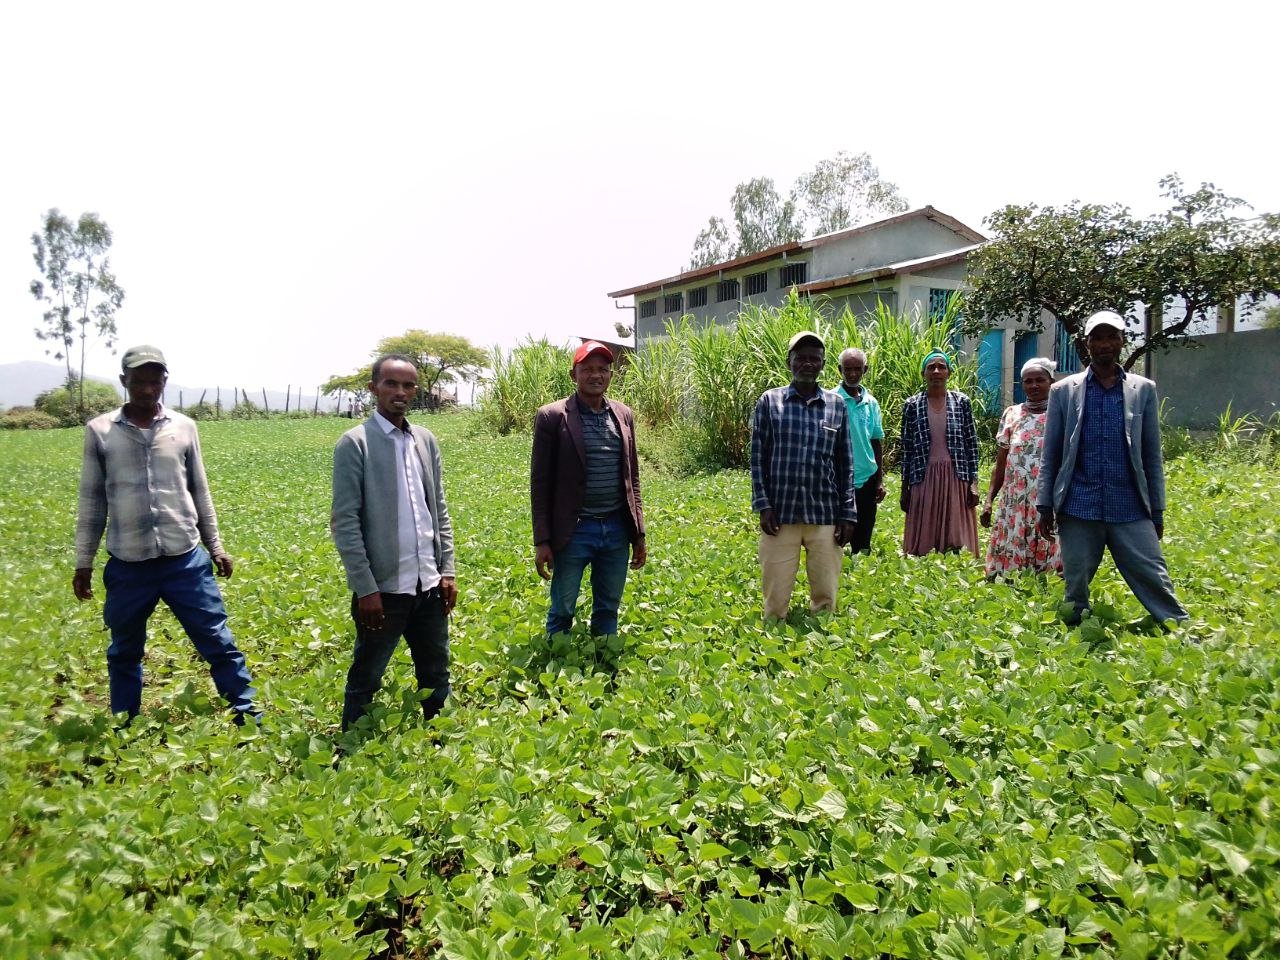 farmer cooperative members standing together in field 